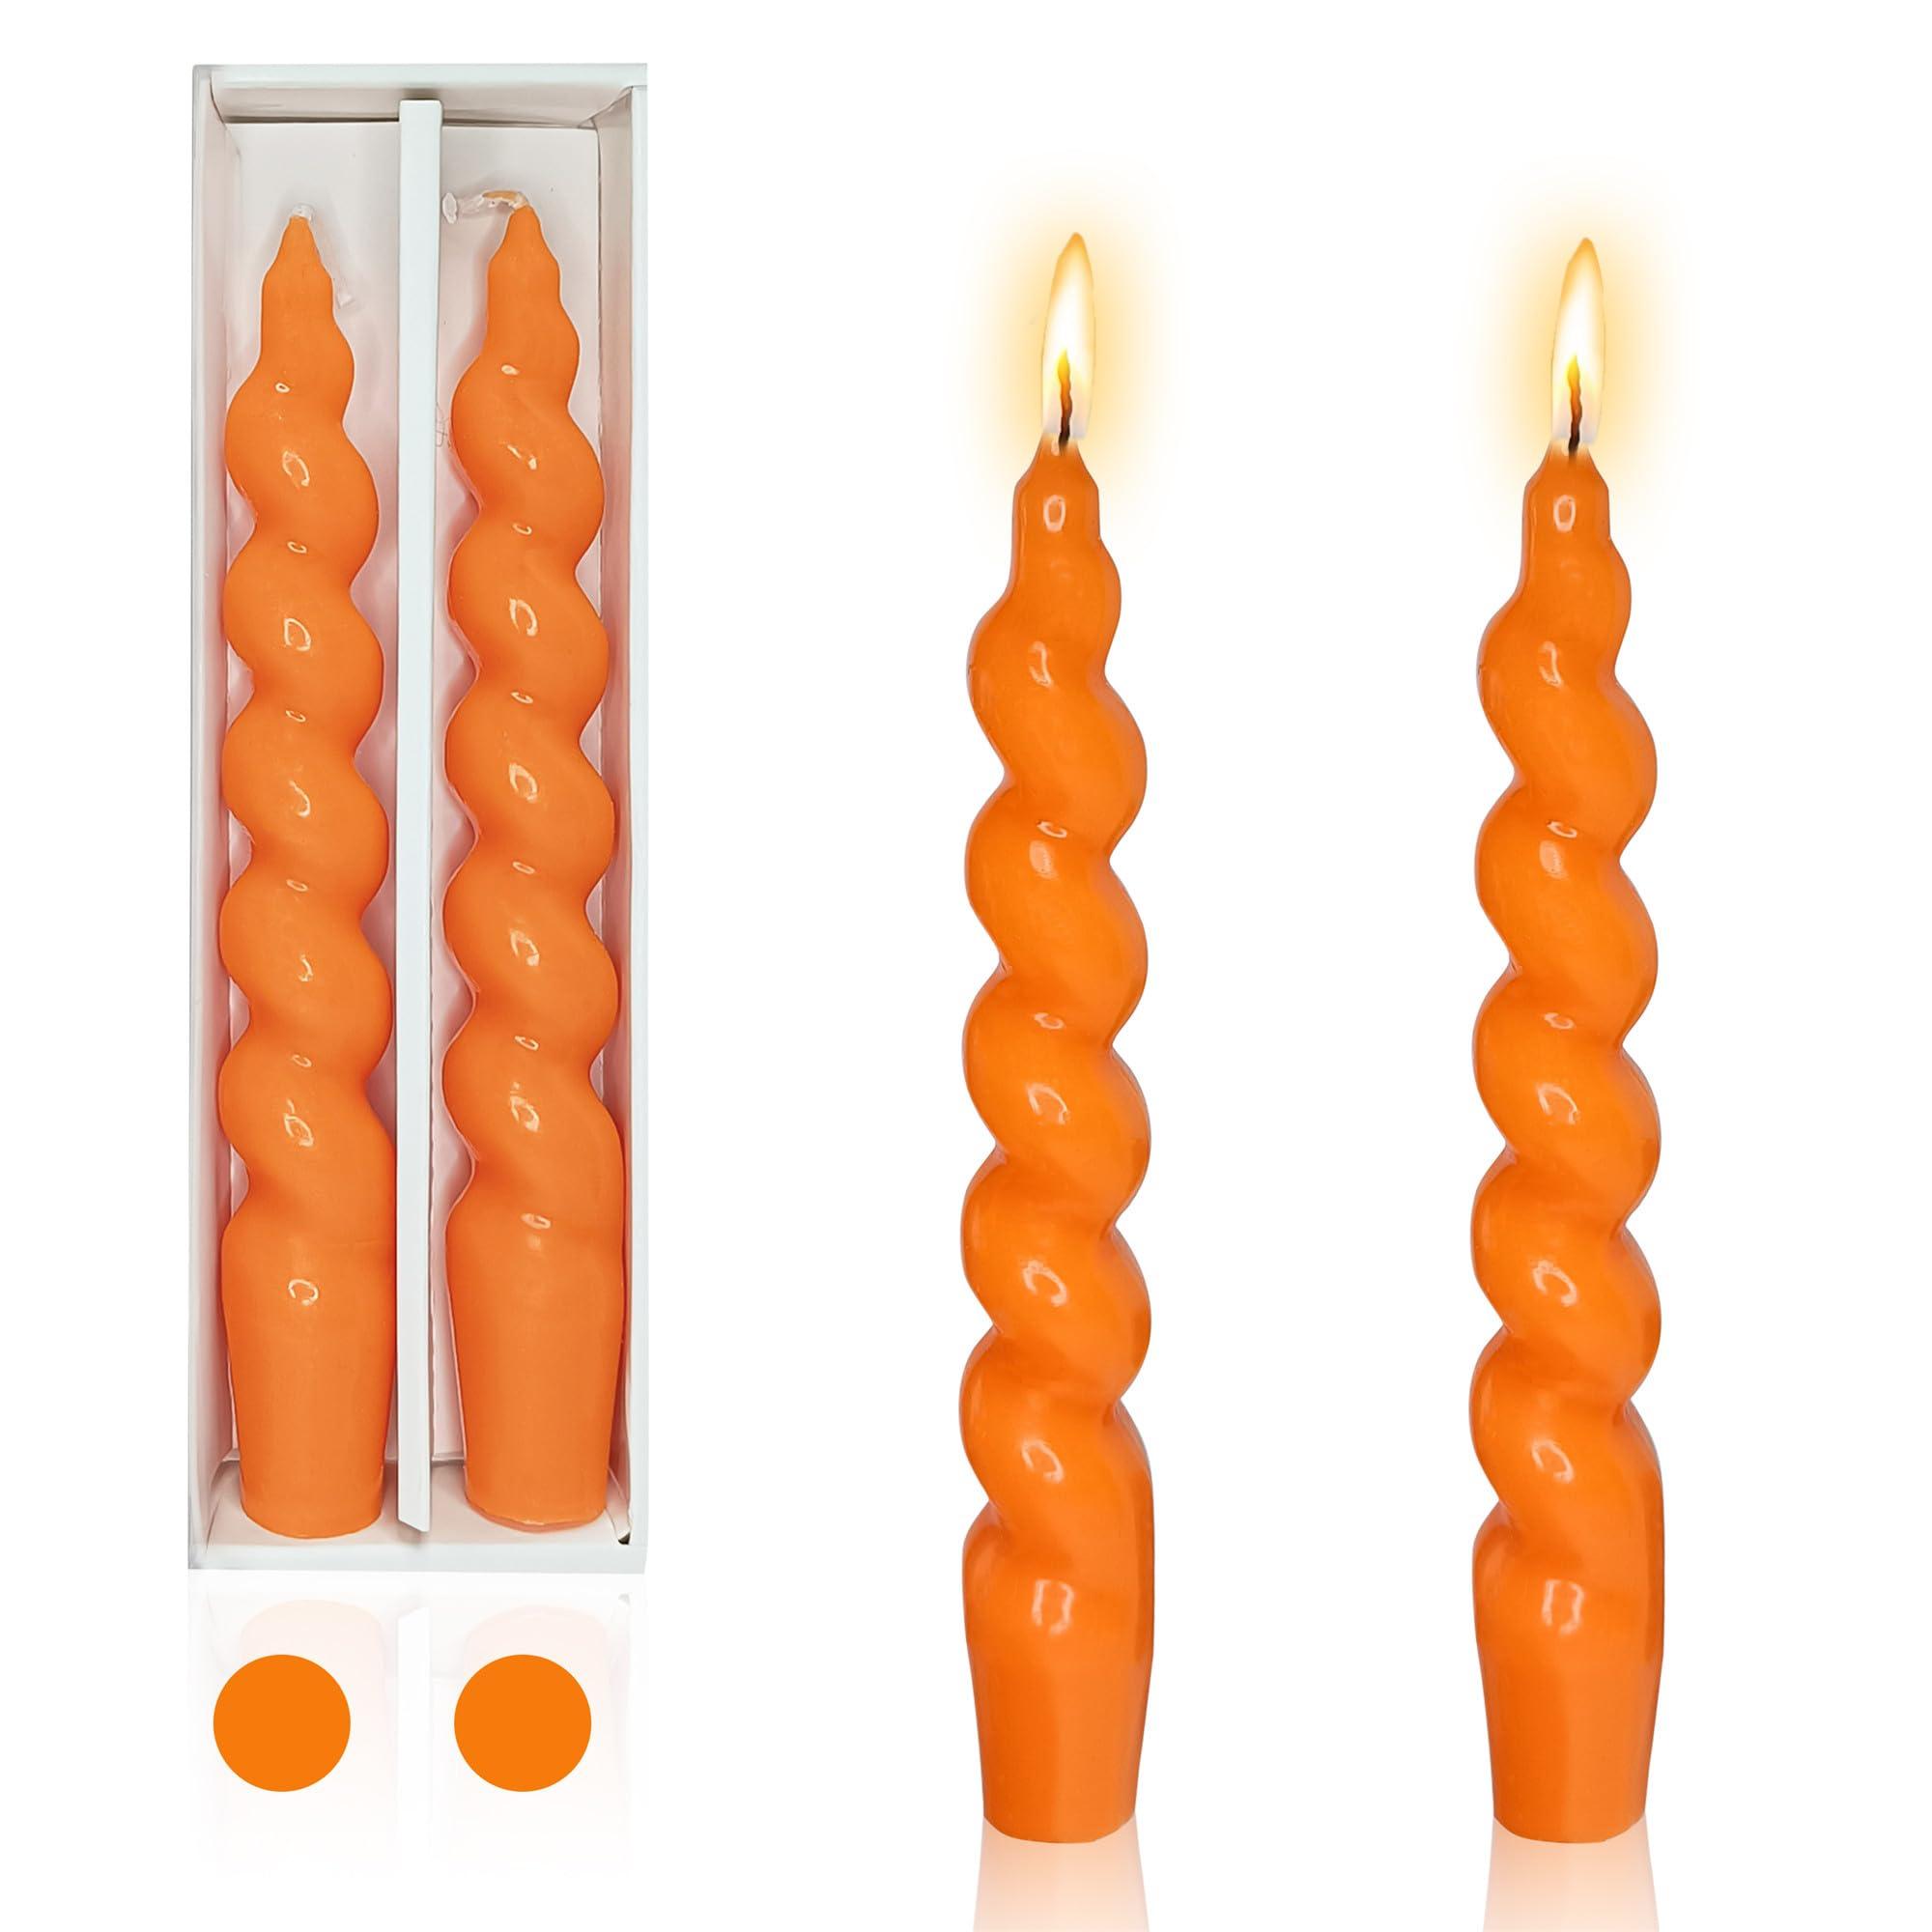 Gedengni 8 Inch Spiral Taper Candles Set Unscented Decoration Dinner Candles Pack of 4 Candles Sticks (Yellow) 0